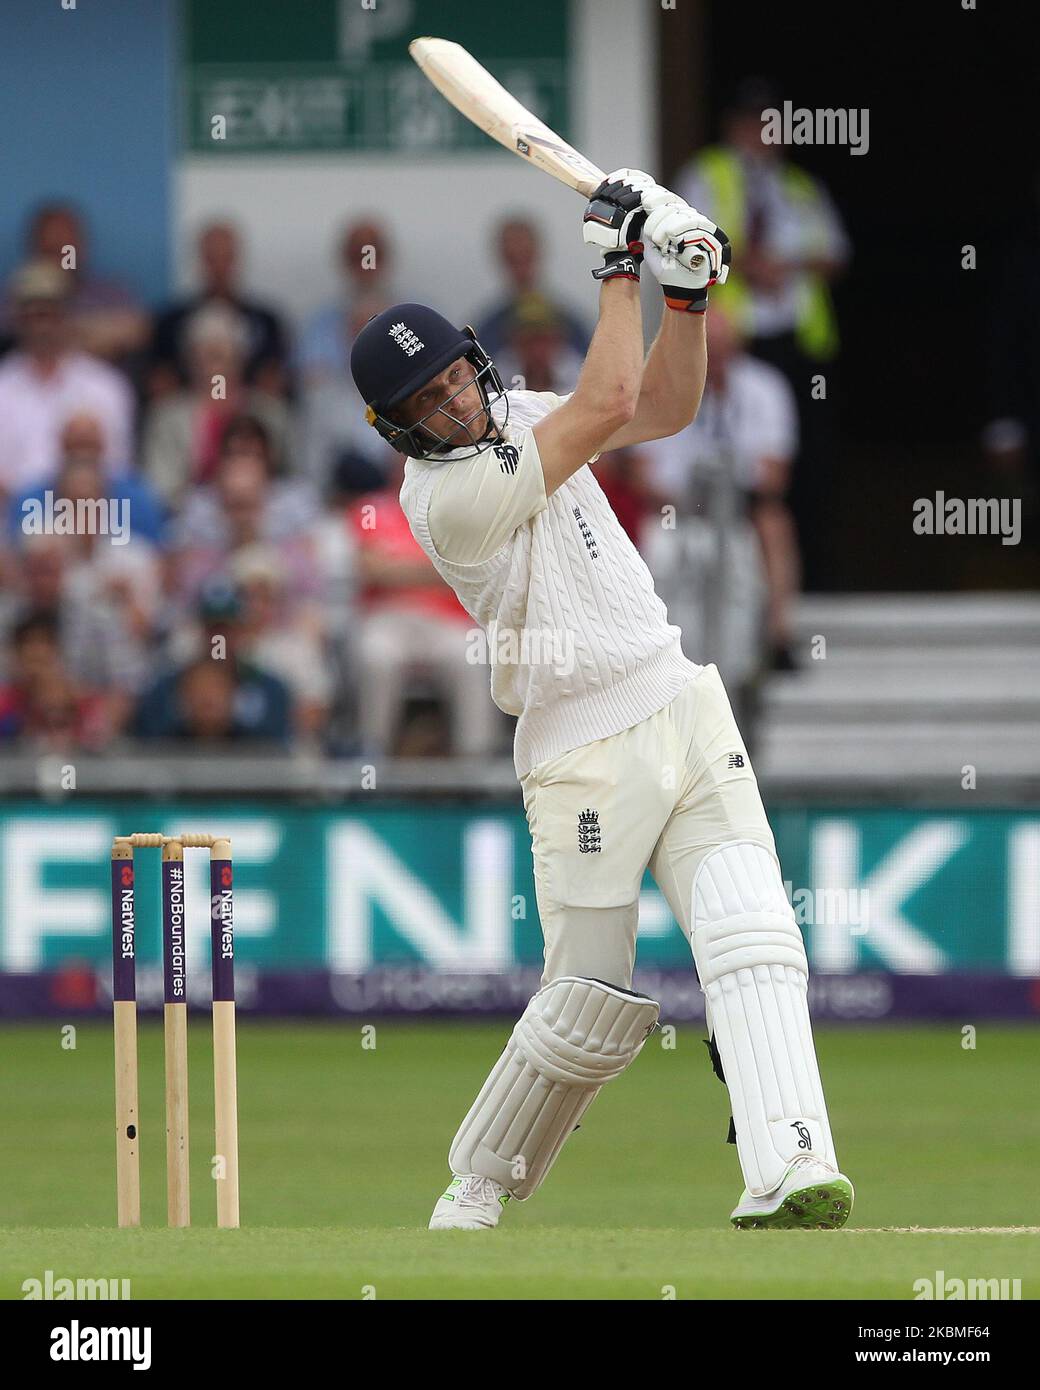 Jos Buttler of England batting during the third day of the Second Nat West Test match between England and Pakistan at Headingley Cricket Ground, Leeds on Sunday 3rd June 2018. (Photo by Mark Fletcher/MI News/NurPhoto) Stock Photo